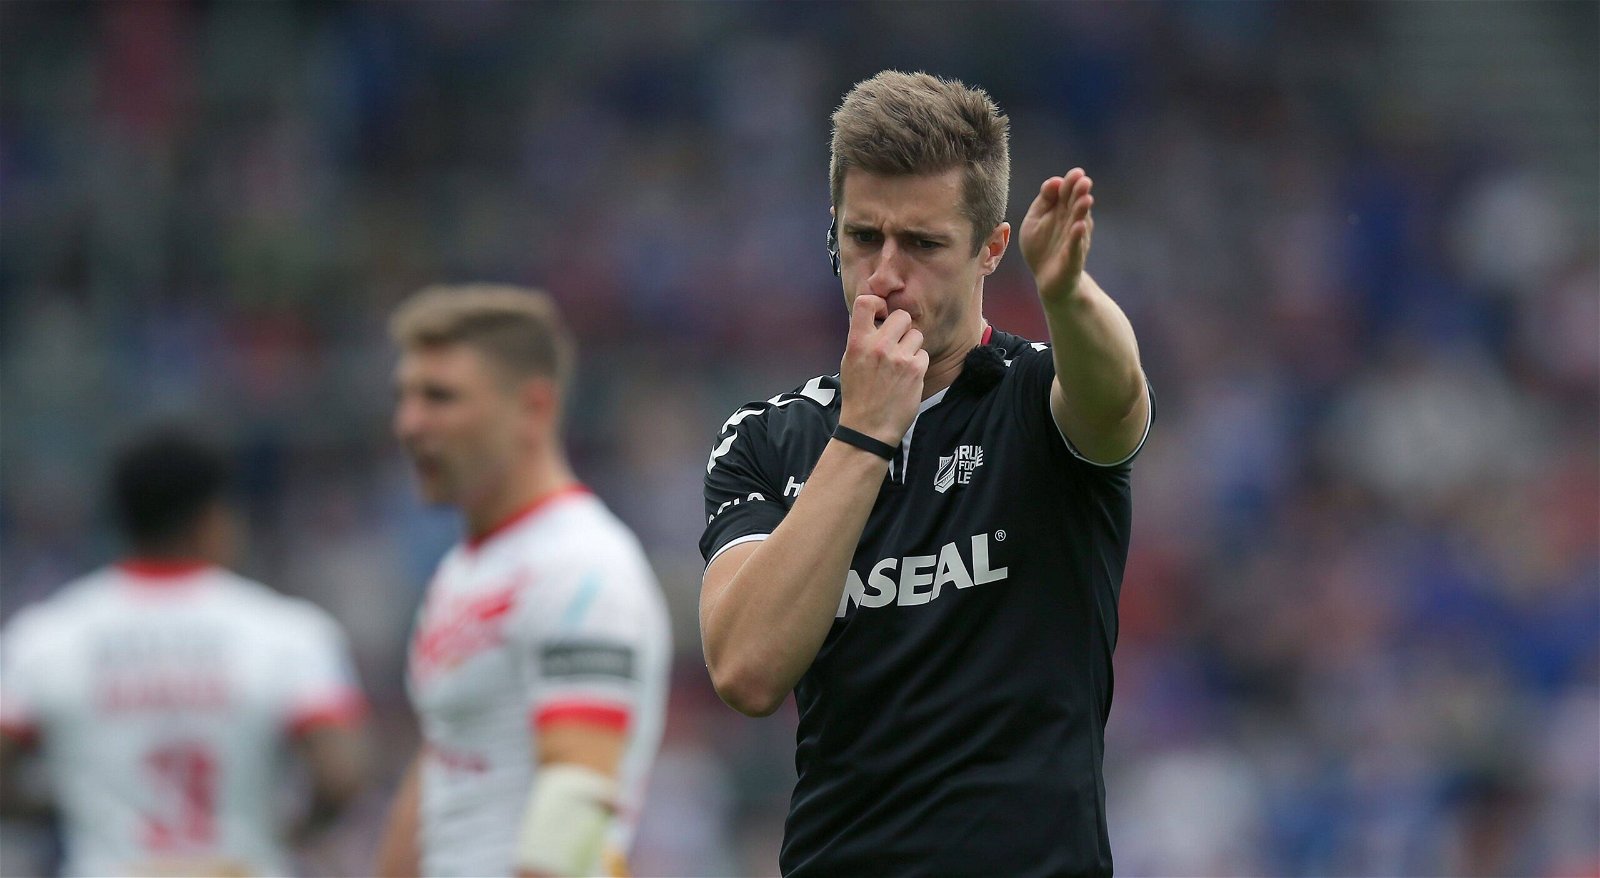 referee Chris Kendall in Super League disciplinary